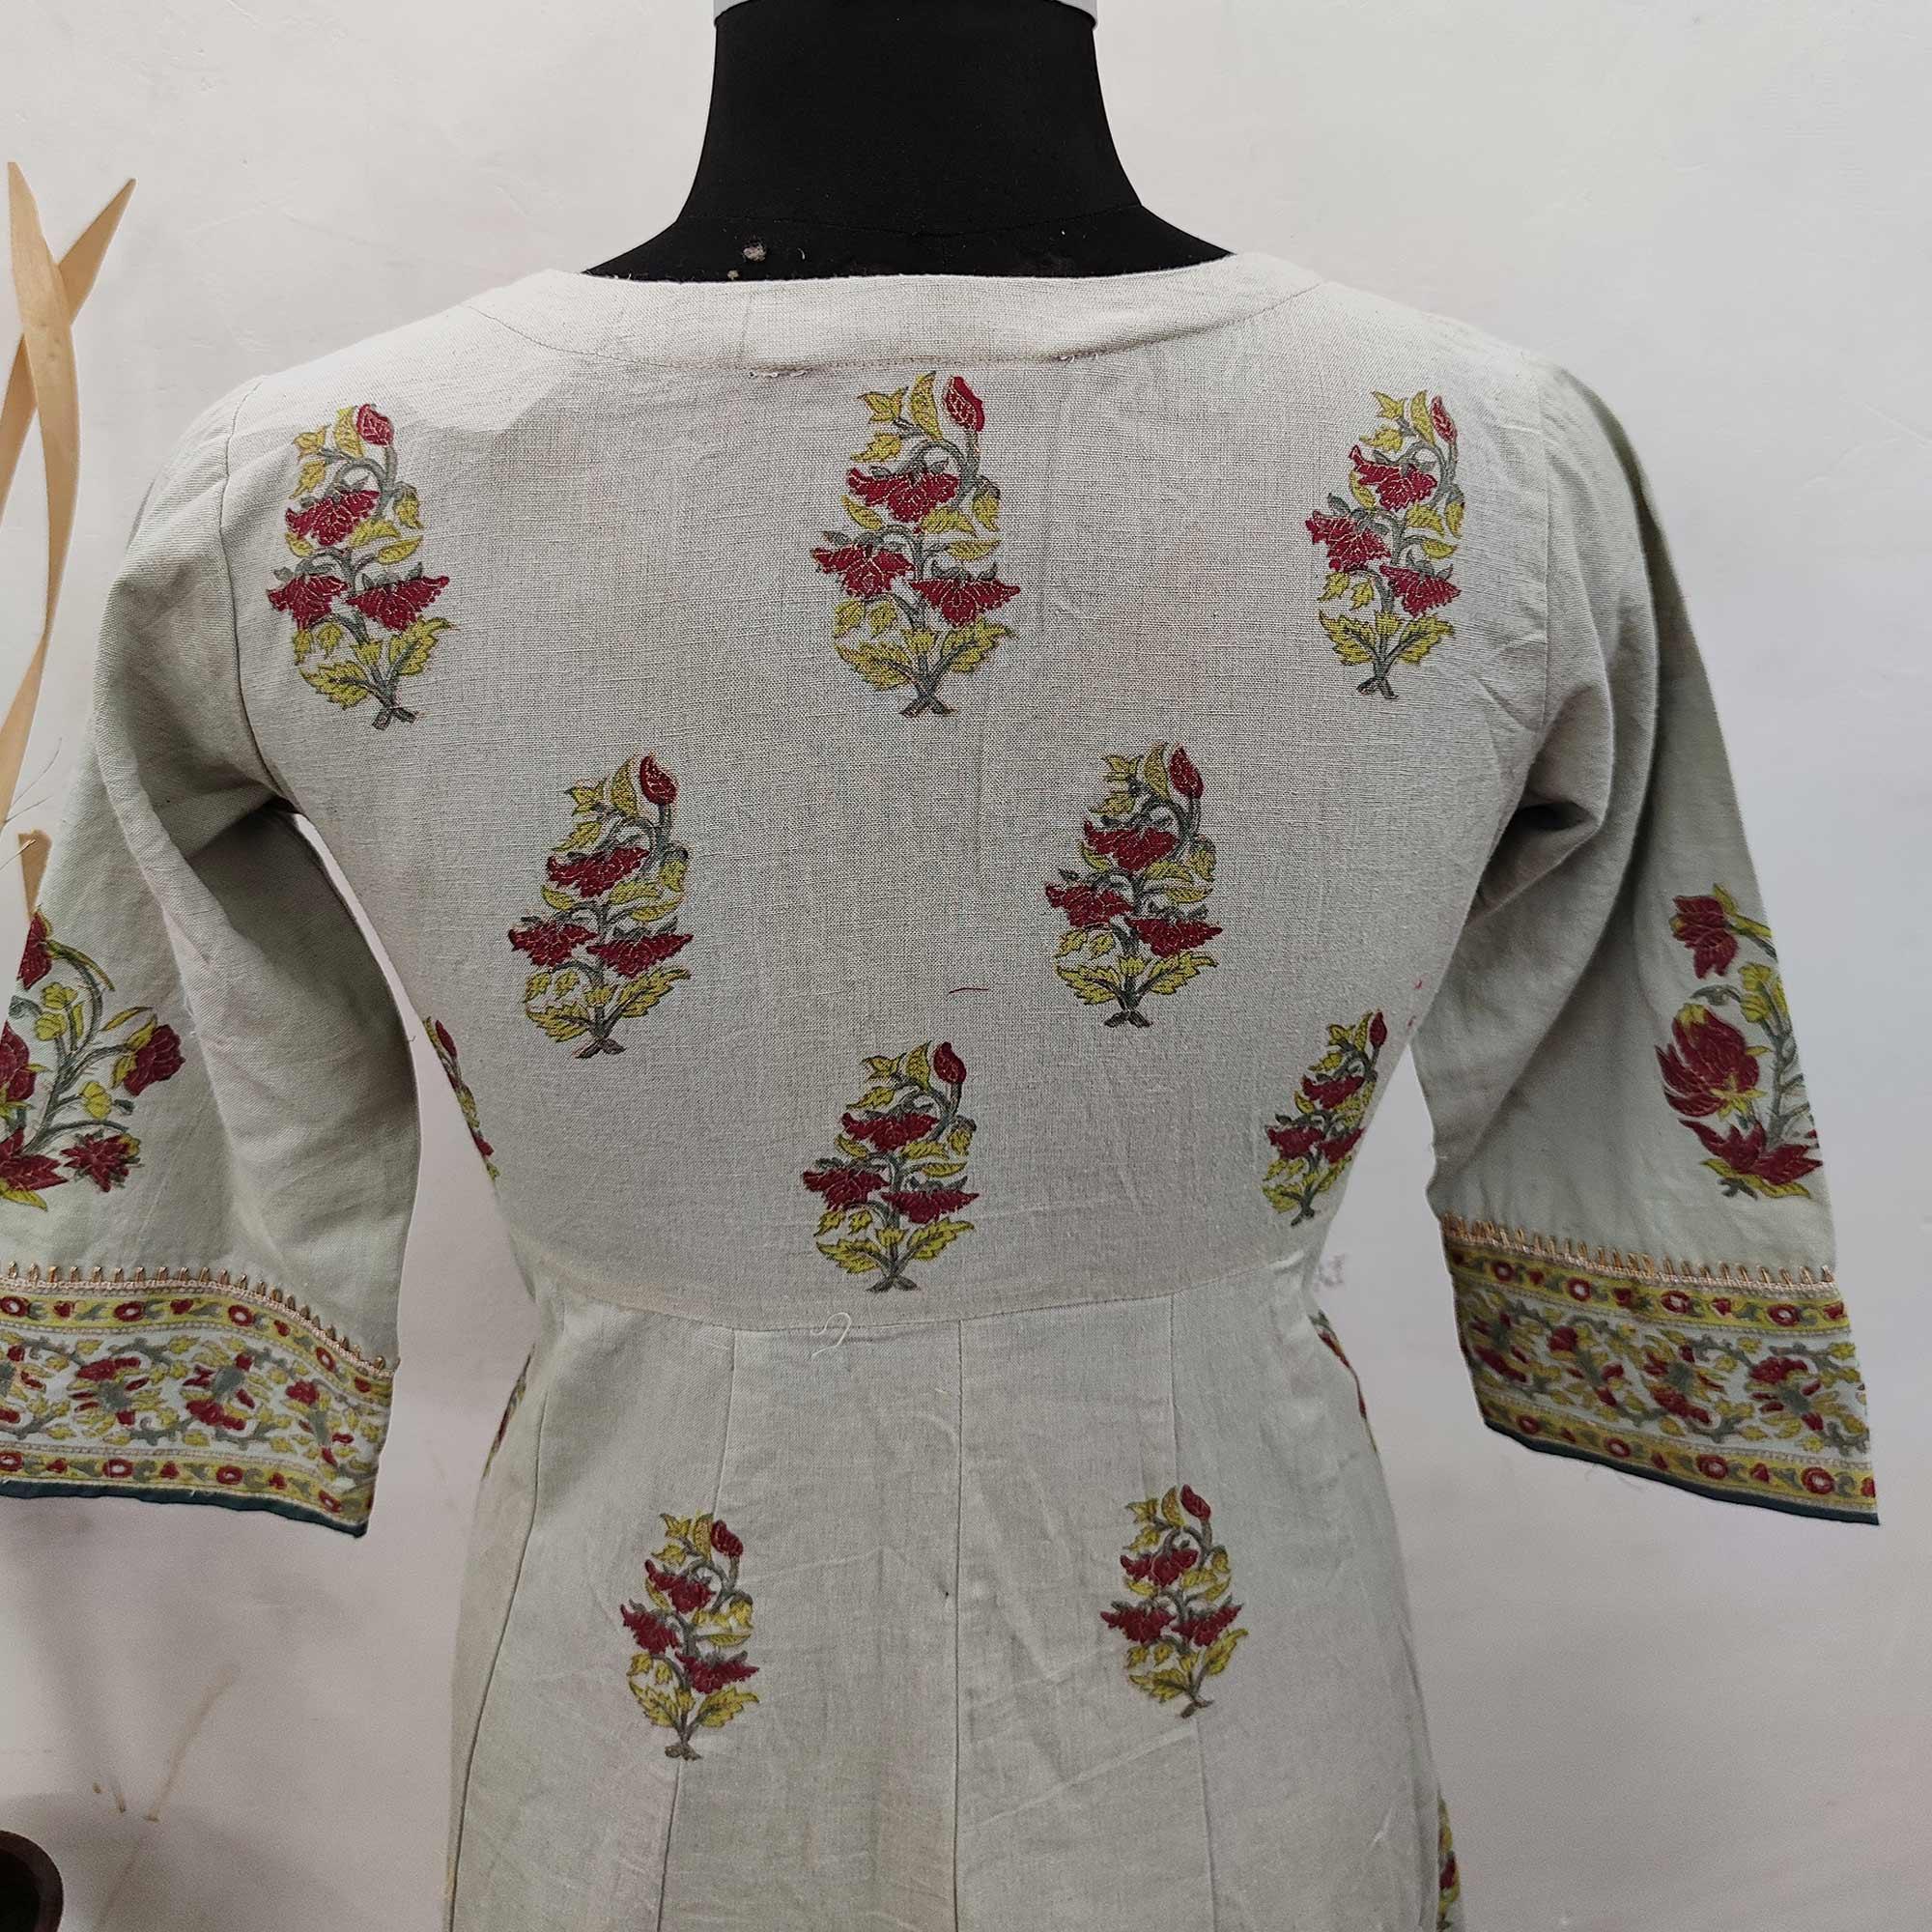 Desirable Grey Colored Party Wear Floral Printed Cotton Anarkali Kurti With Dupatta - Peachmode